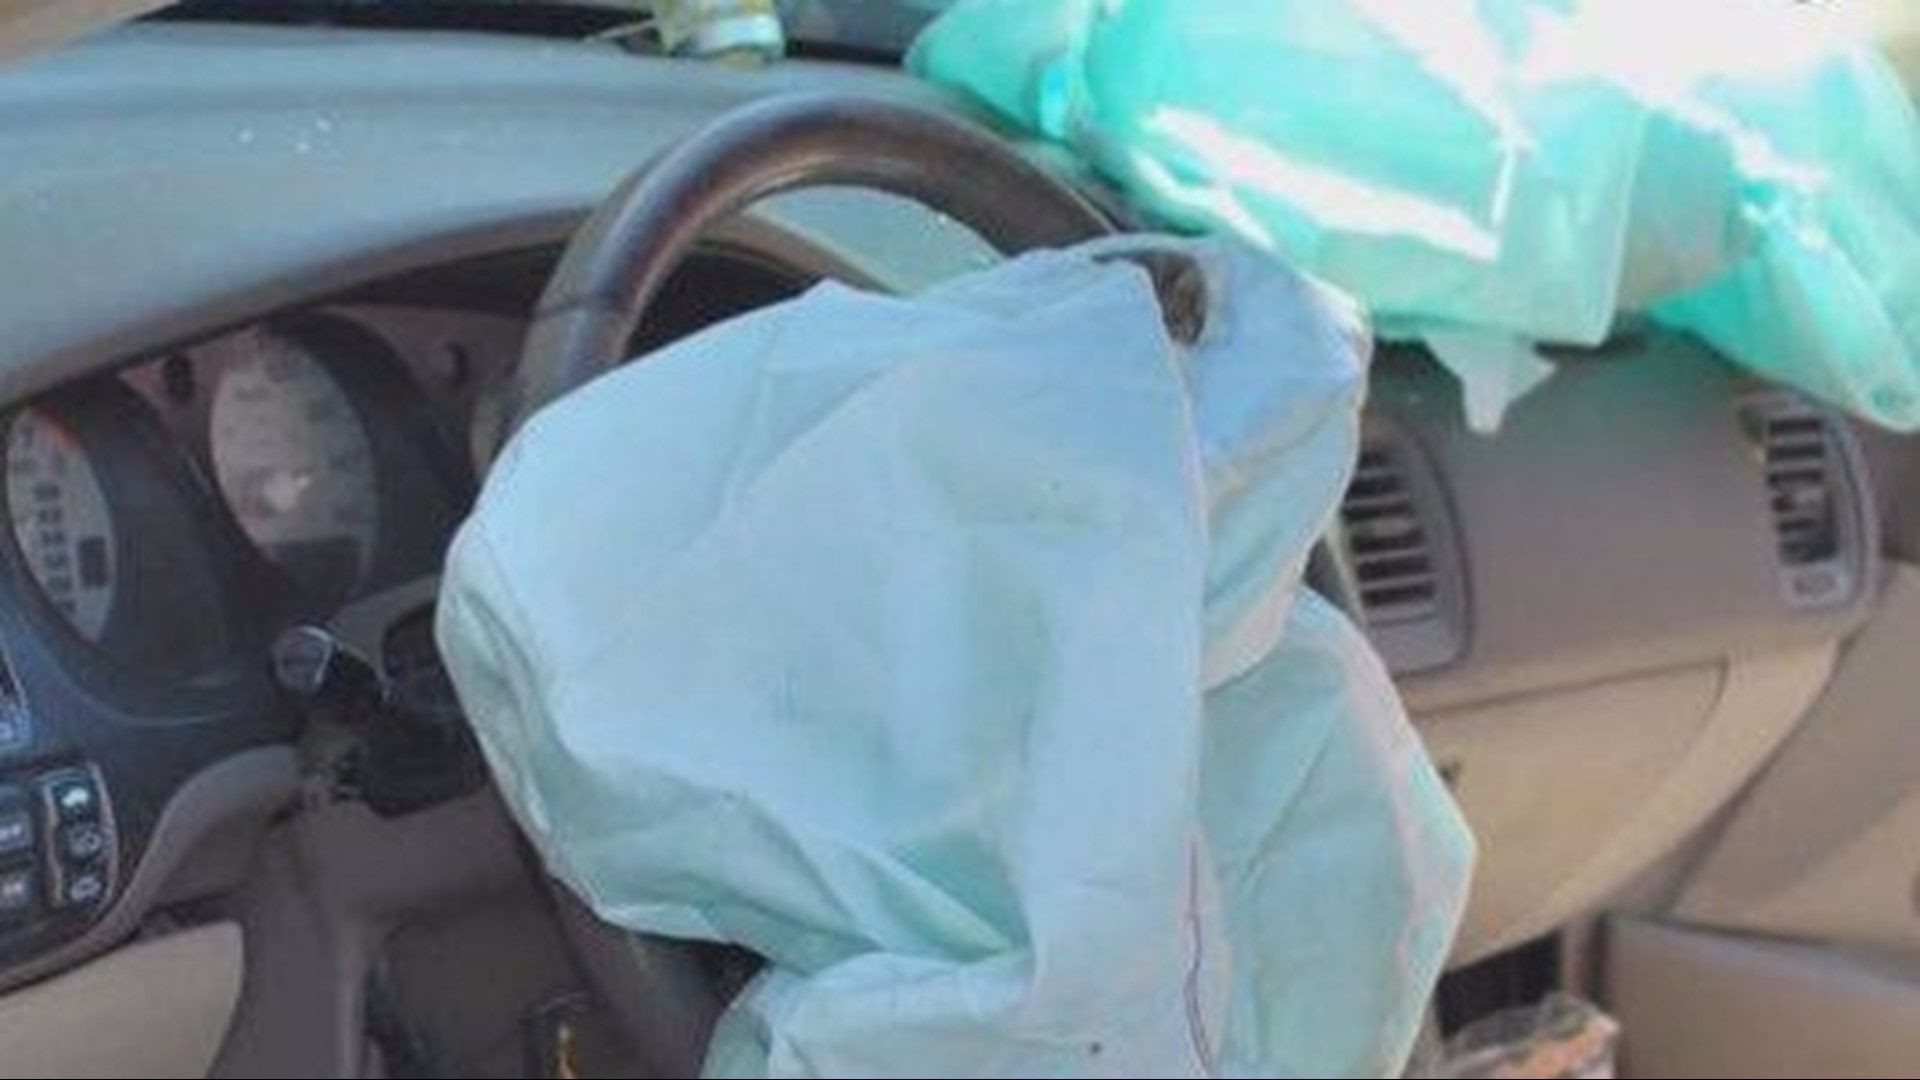 Disturbing statistics show over 30 million US drivers oblivious to high-risk airbags